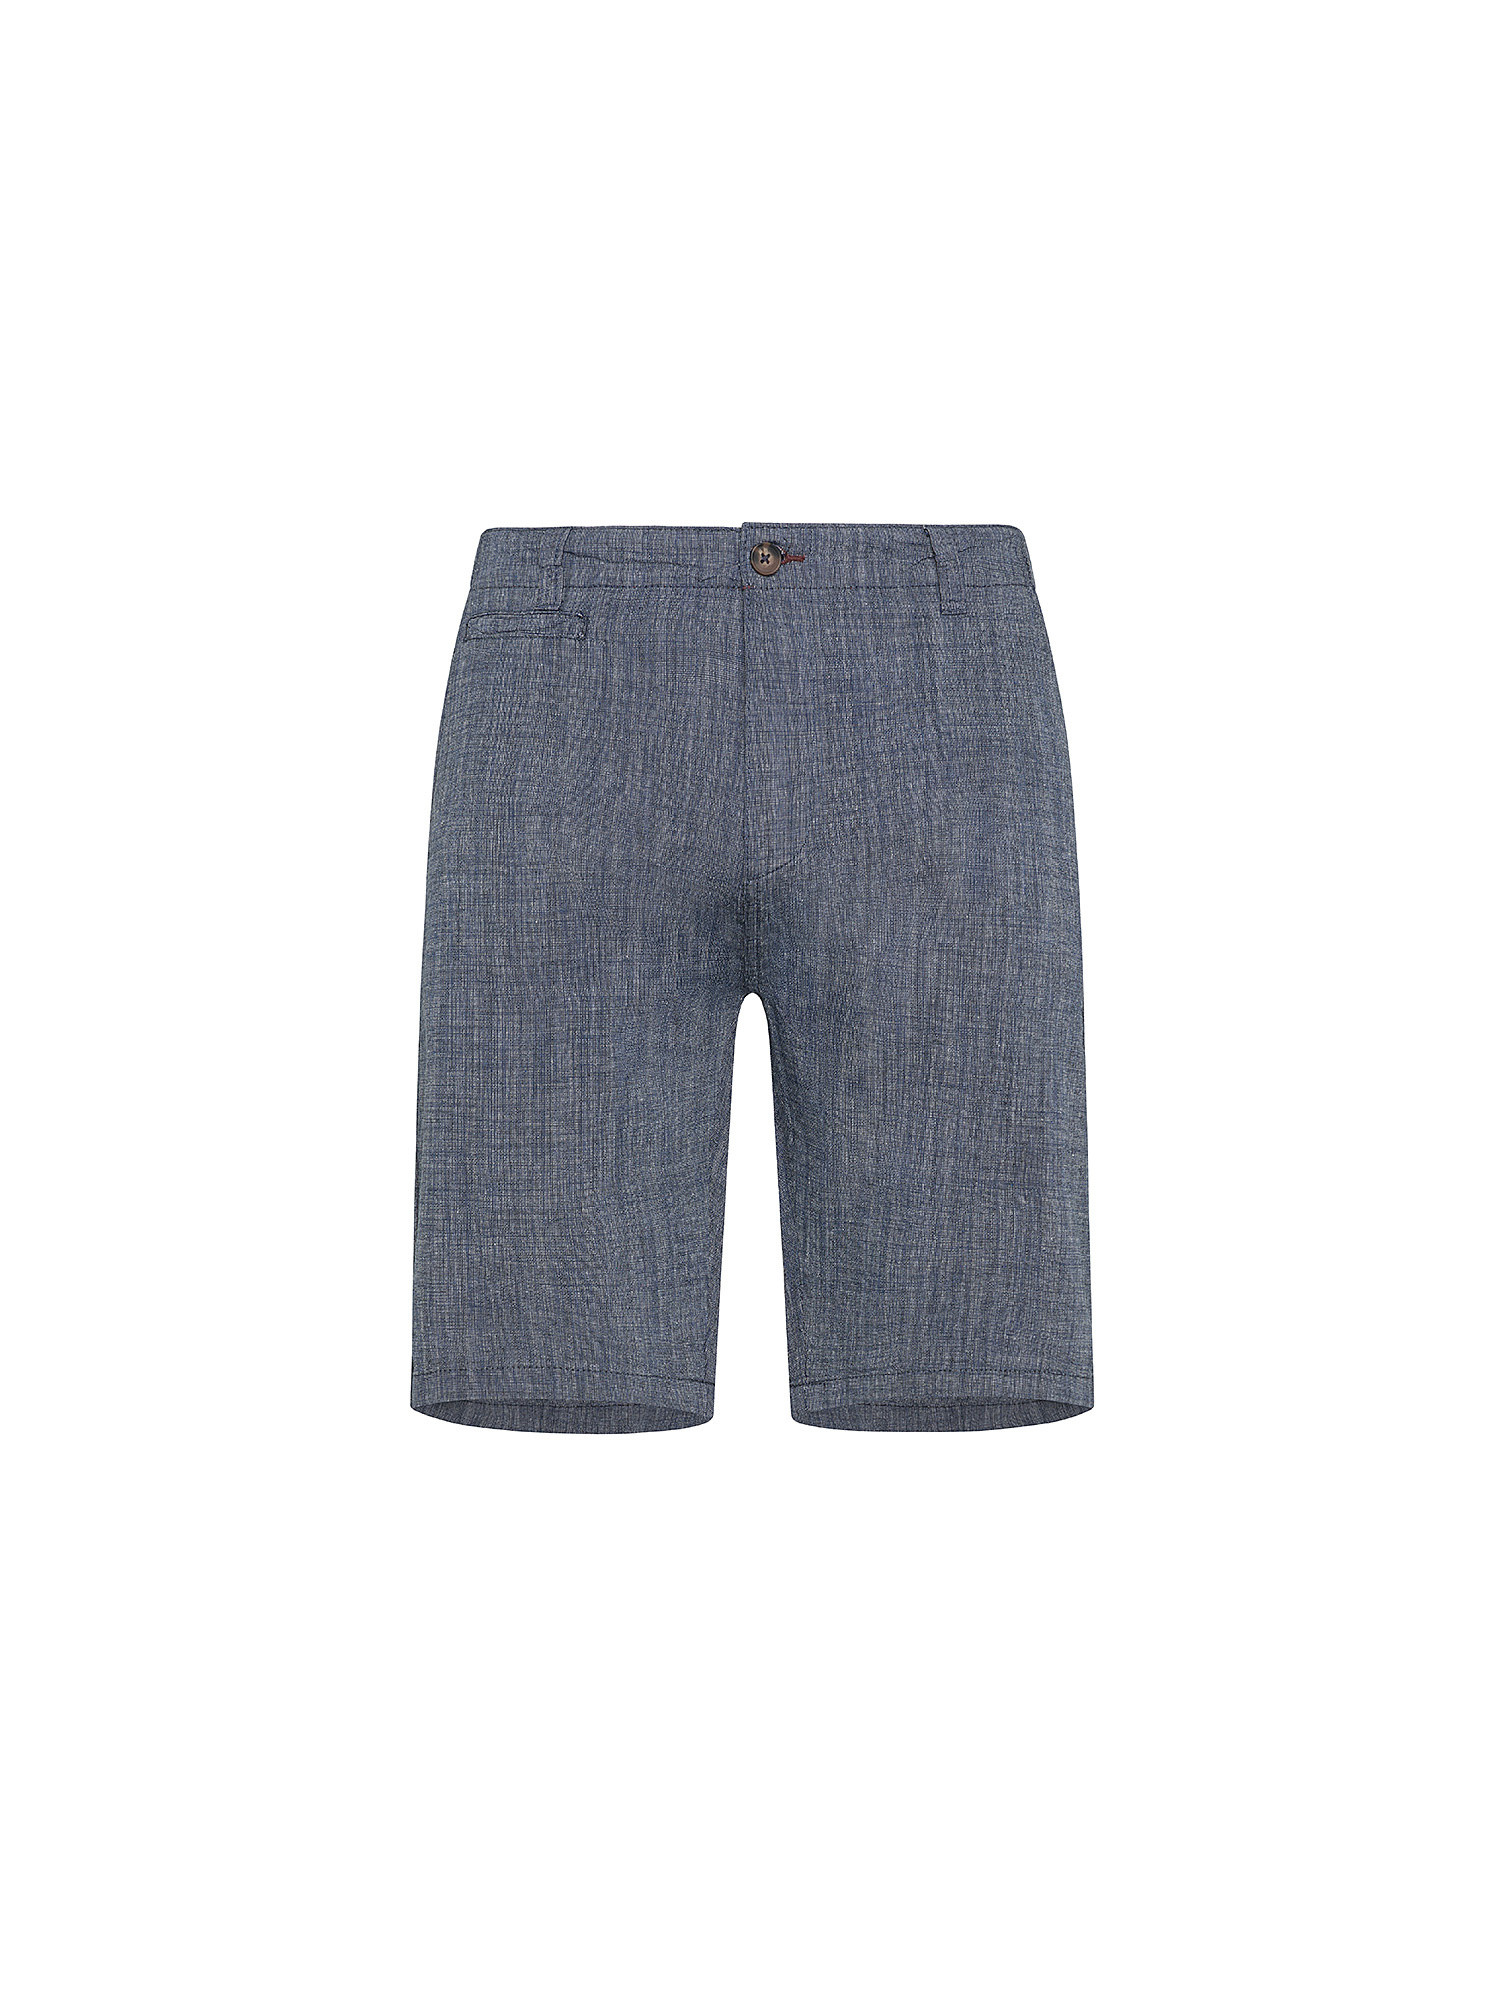 JCT - Chino bermuda in pure cotton, Dark Blue, large image number 0